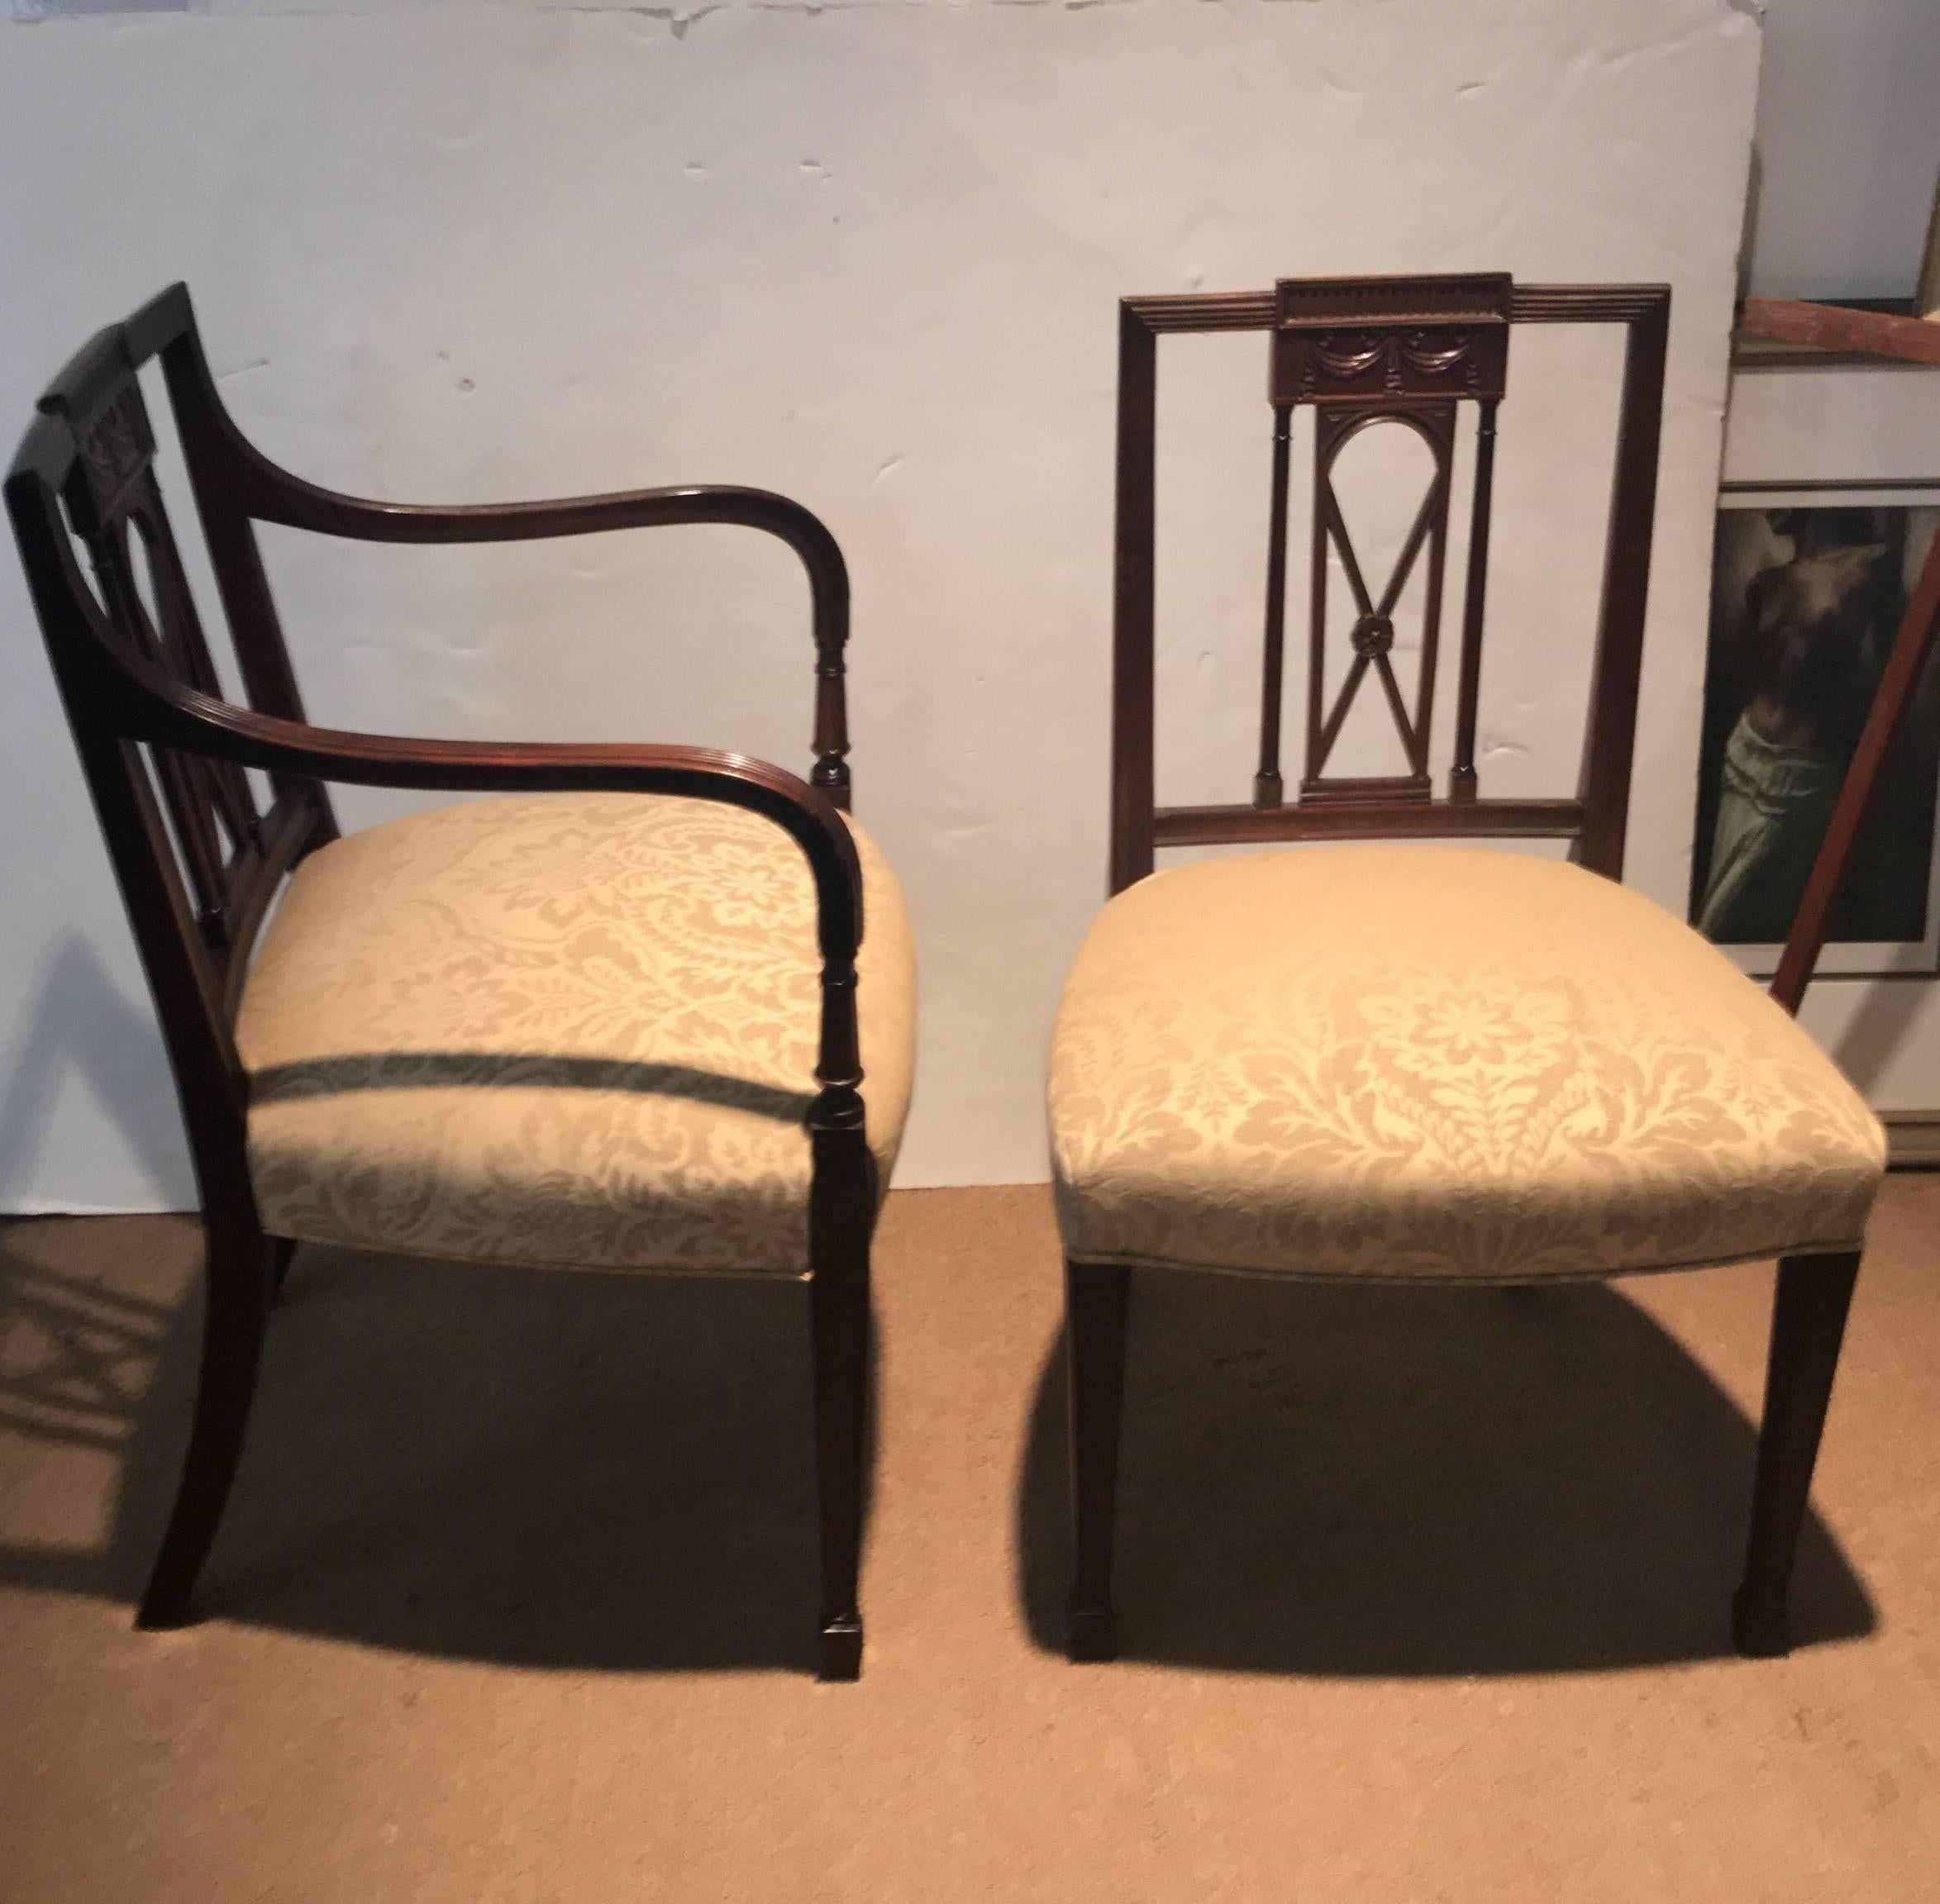 Hand carved mahogany in a simplified Hepplewhite style in mahogany with new cotton linen damask upholstery. Two armchairs and four side chairs with smaller square backs and hand carved details. The arm chairs with reeded simple arms. The square legs